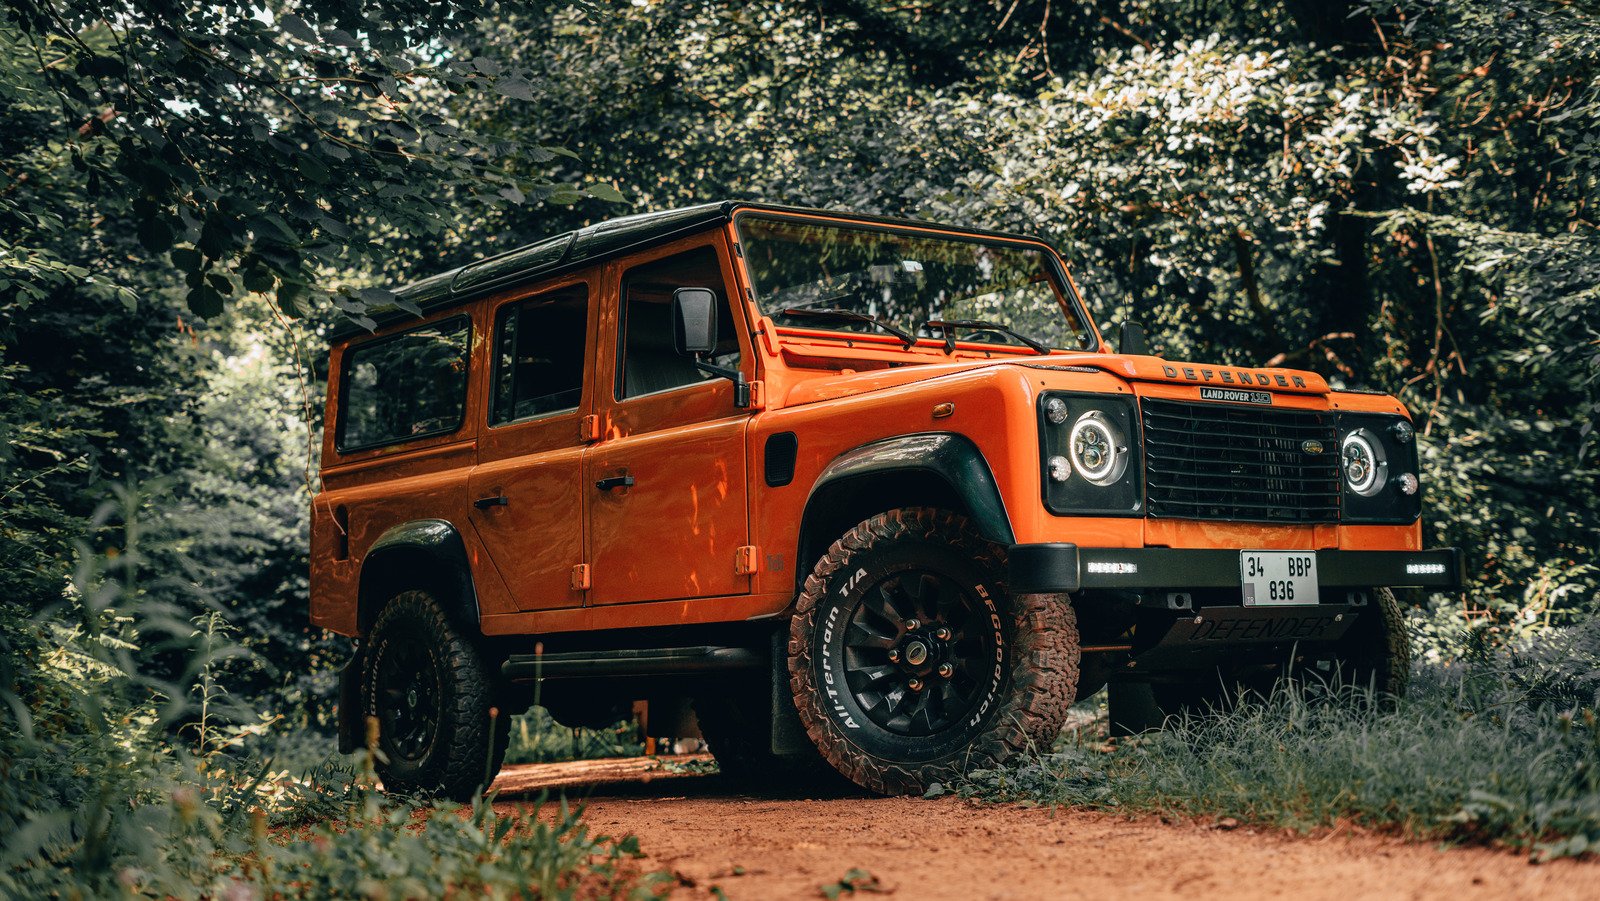 The Real Reason America Banned The Land Rover Defender